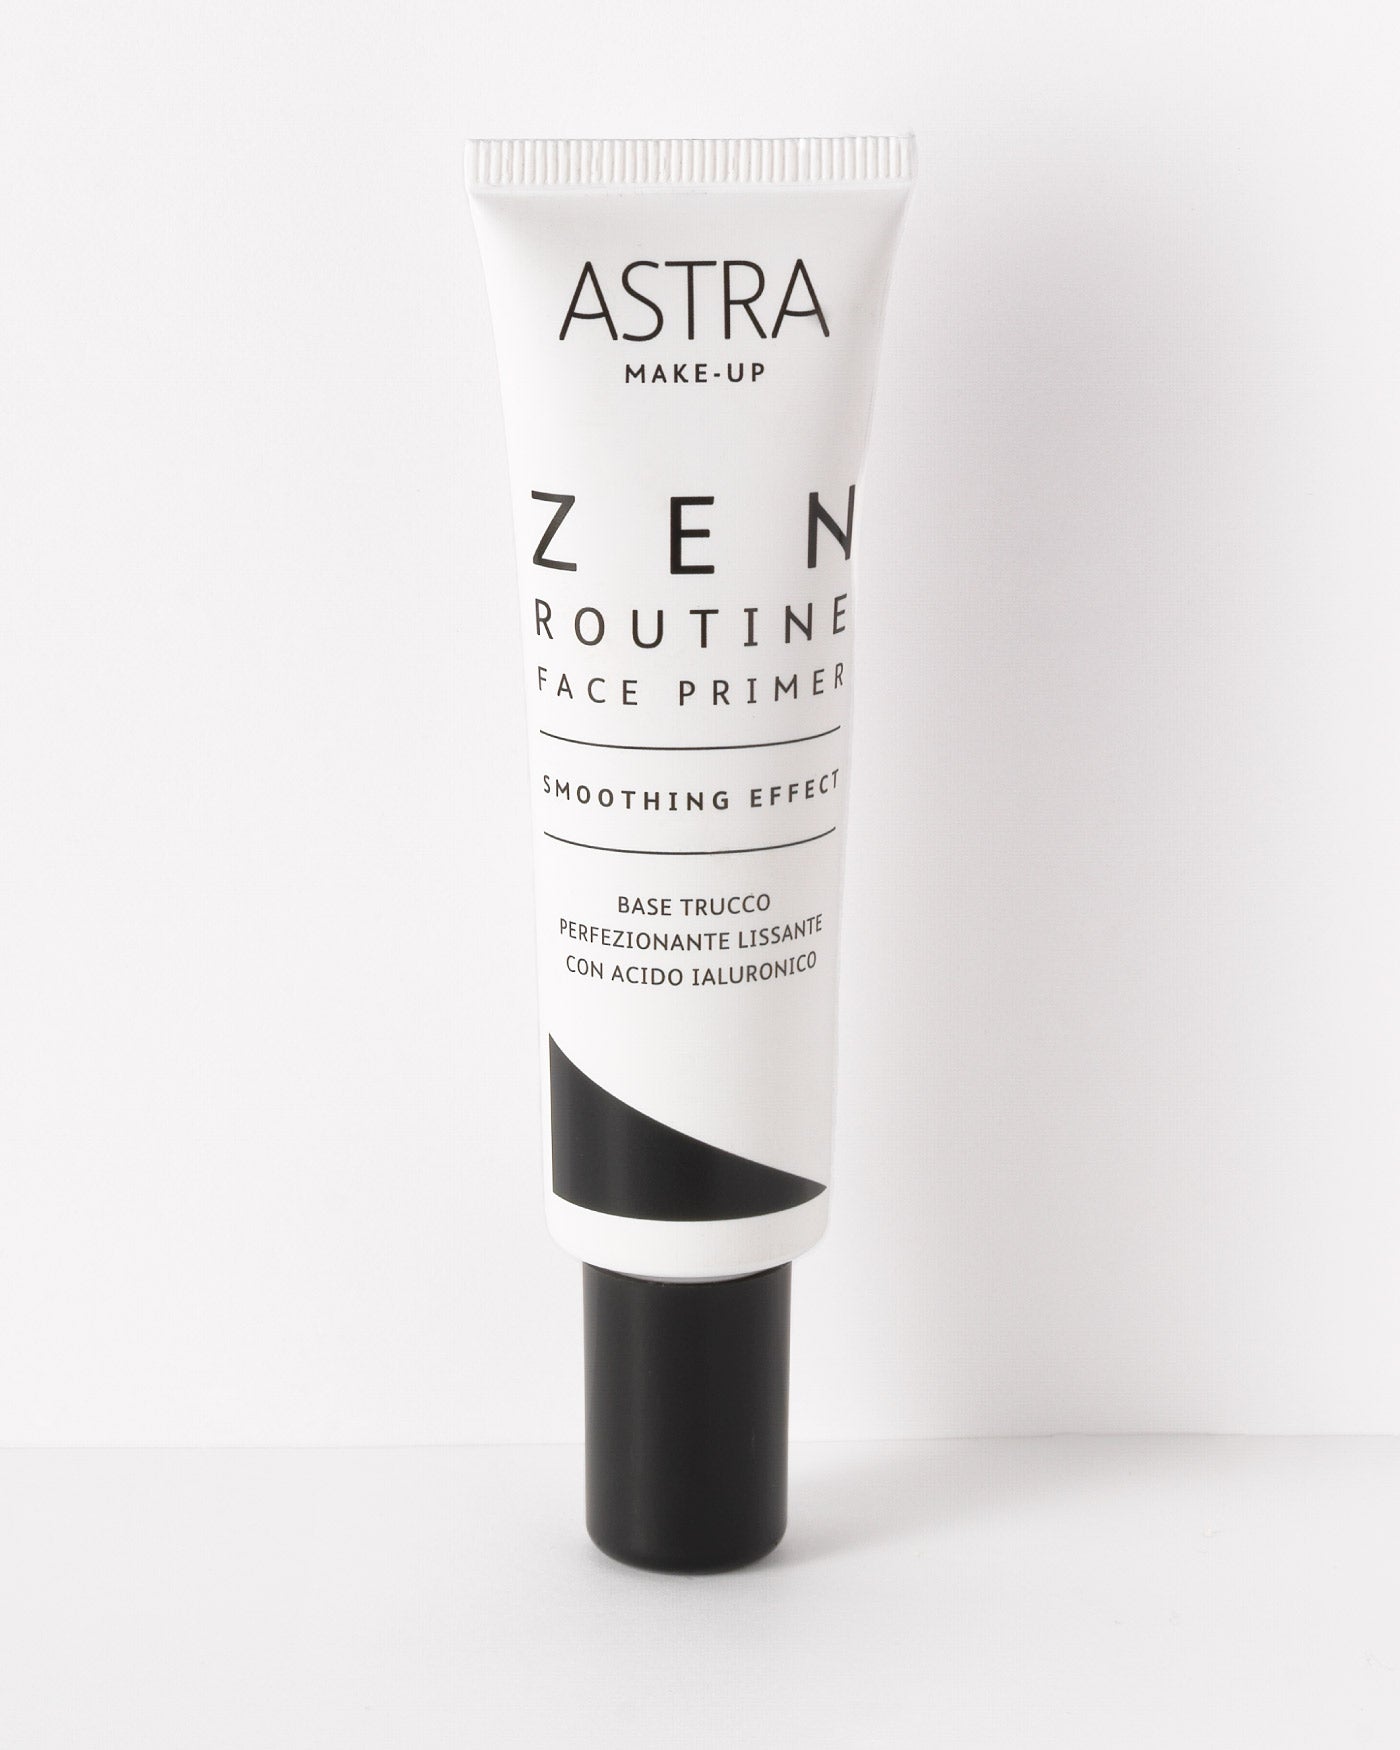 ZEN ROUTINE FACE PRIMER SMOOTHING EFFECT - All Products - Astra Make-Up